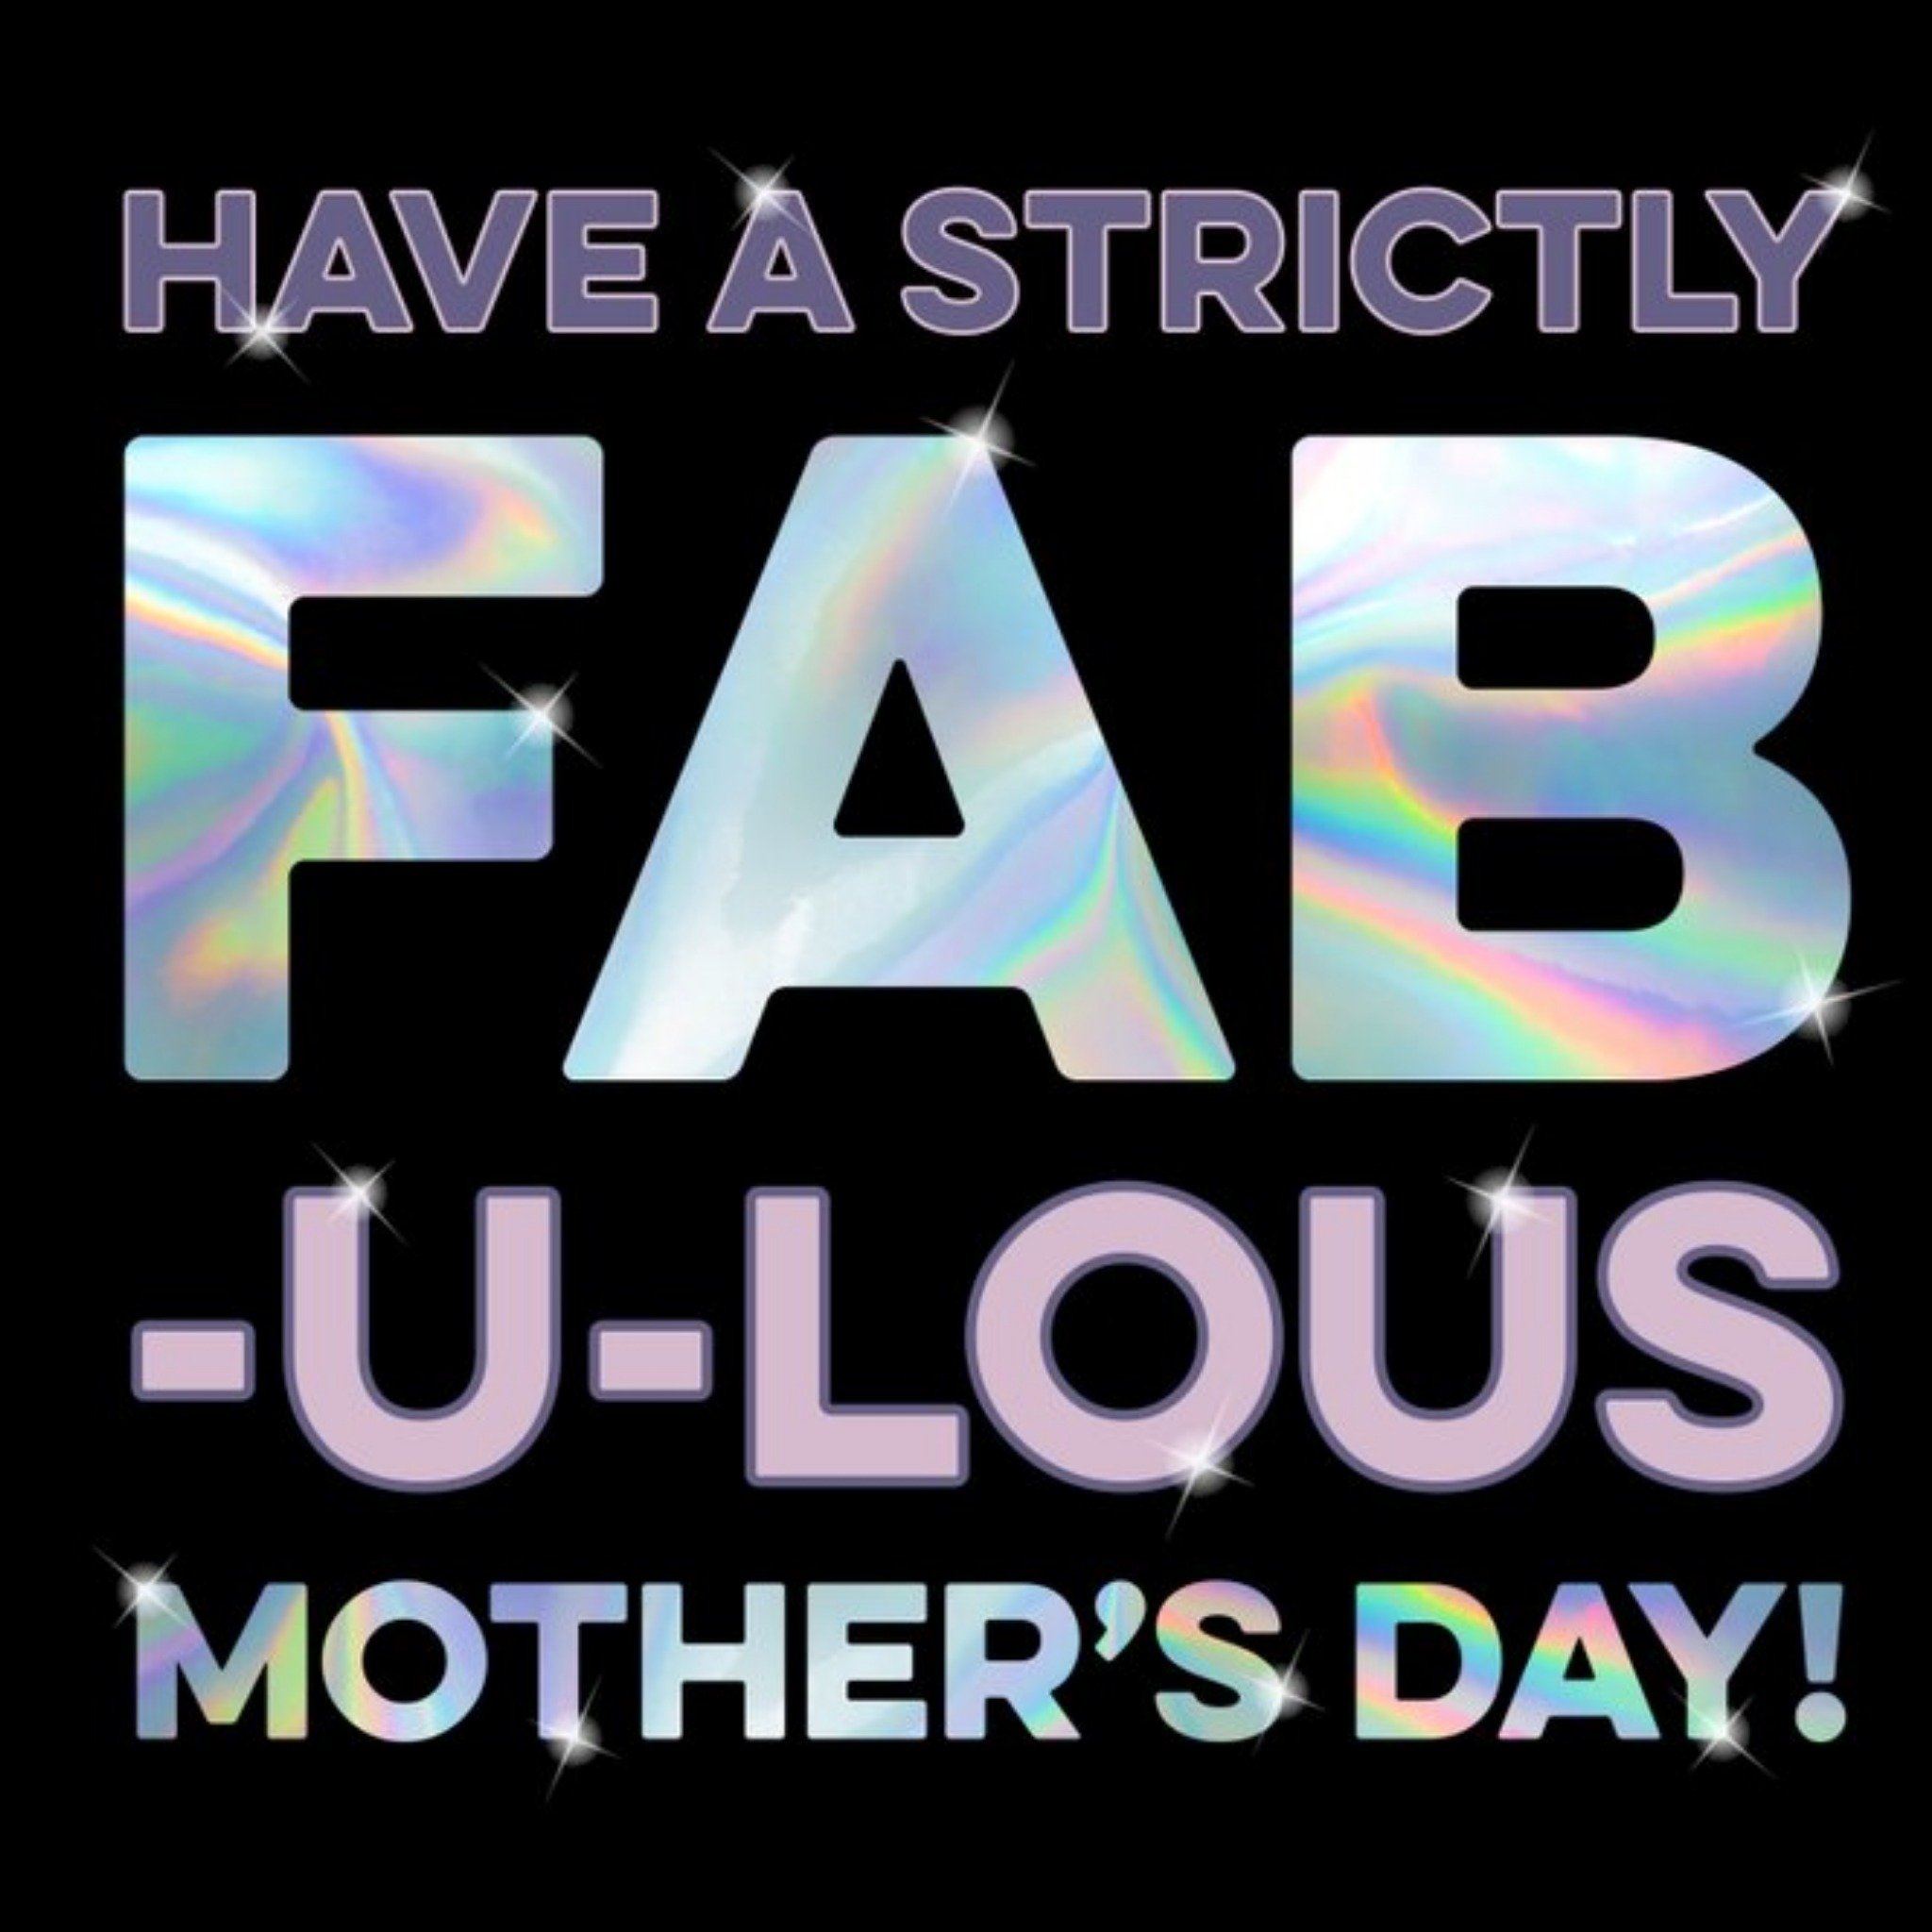 Strictly Come Dancing Have A Strictly Fabulous Mothers Day Card, Large